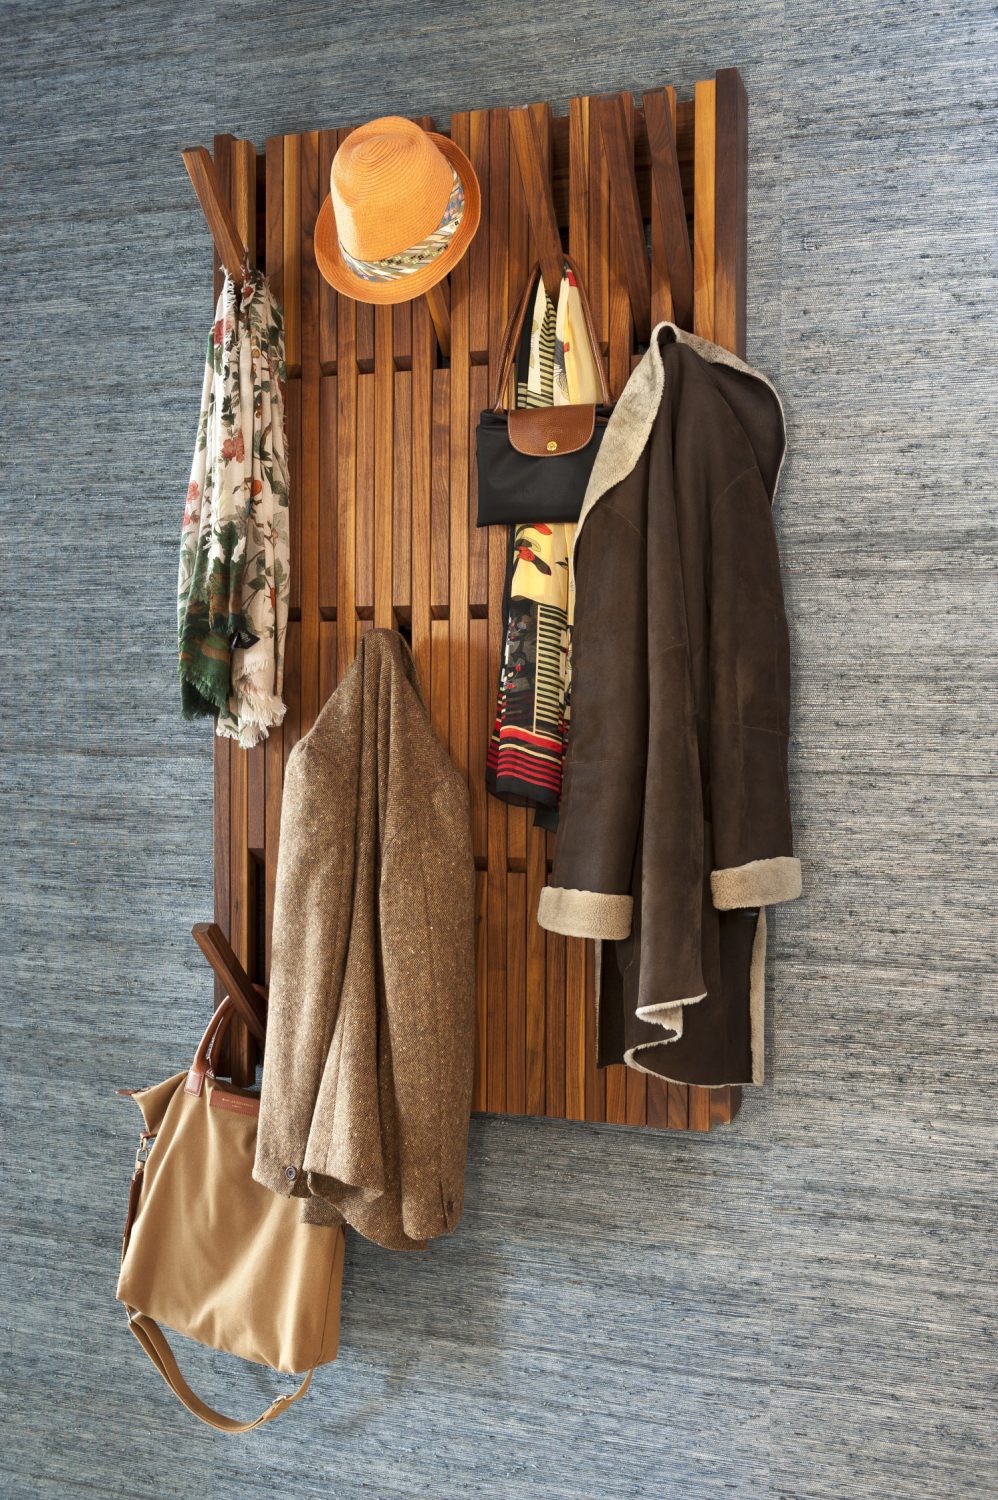 The spacious entrance way, with its artful piano coat rack is wonderfully uncluttered